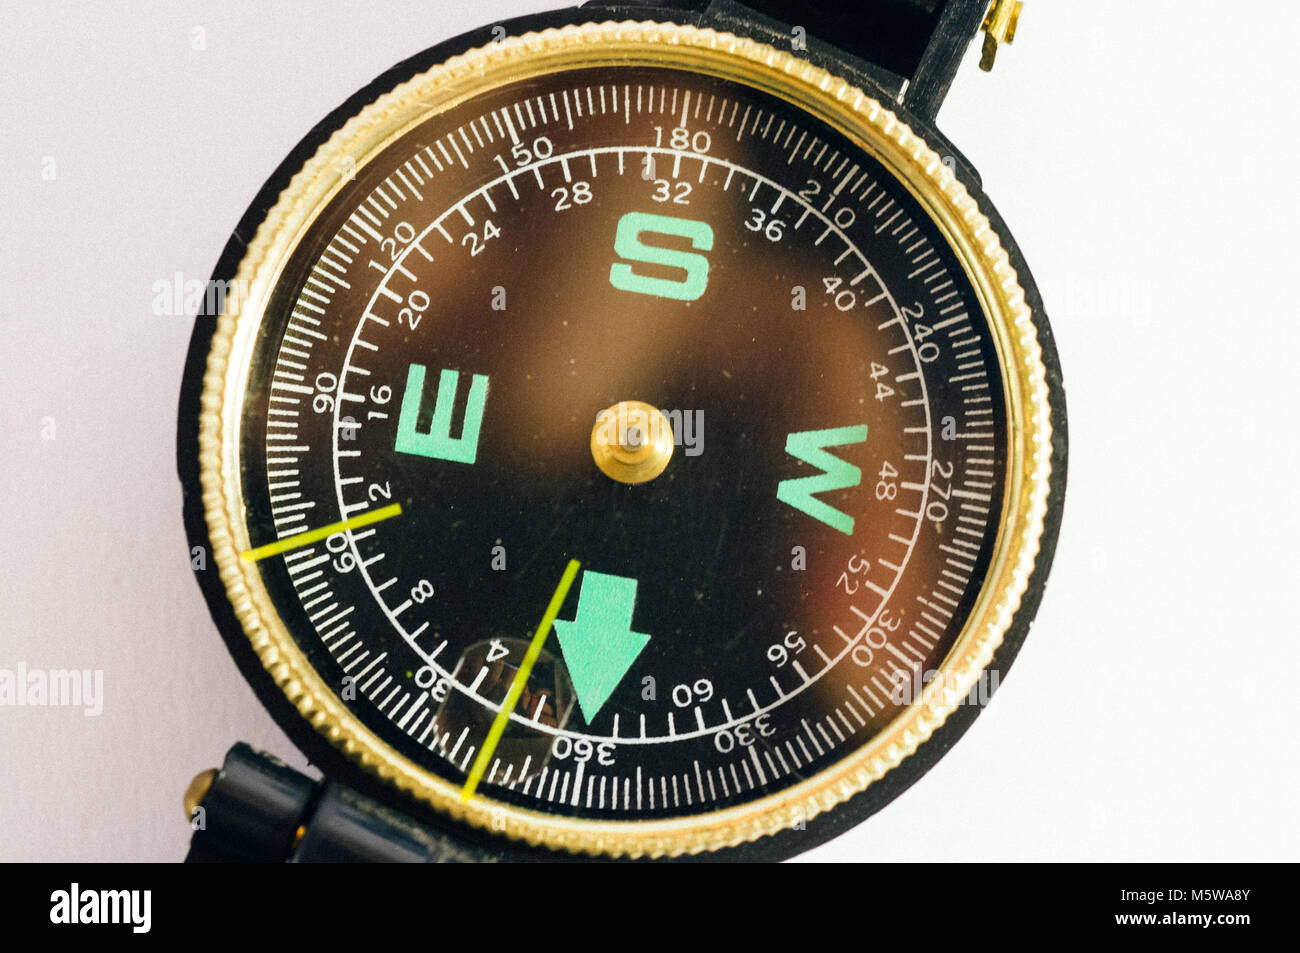 compass close up, concept of direction life and path searching as well as outdoor orienteering activity Stock Photo